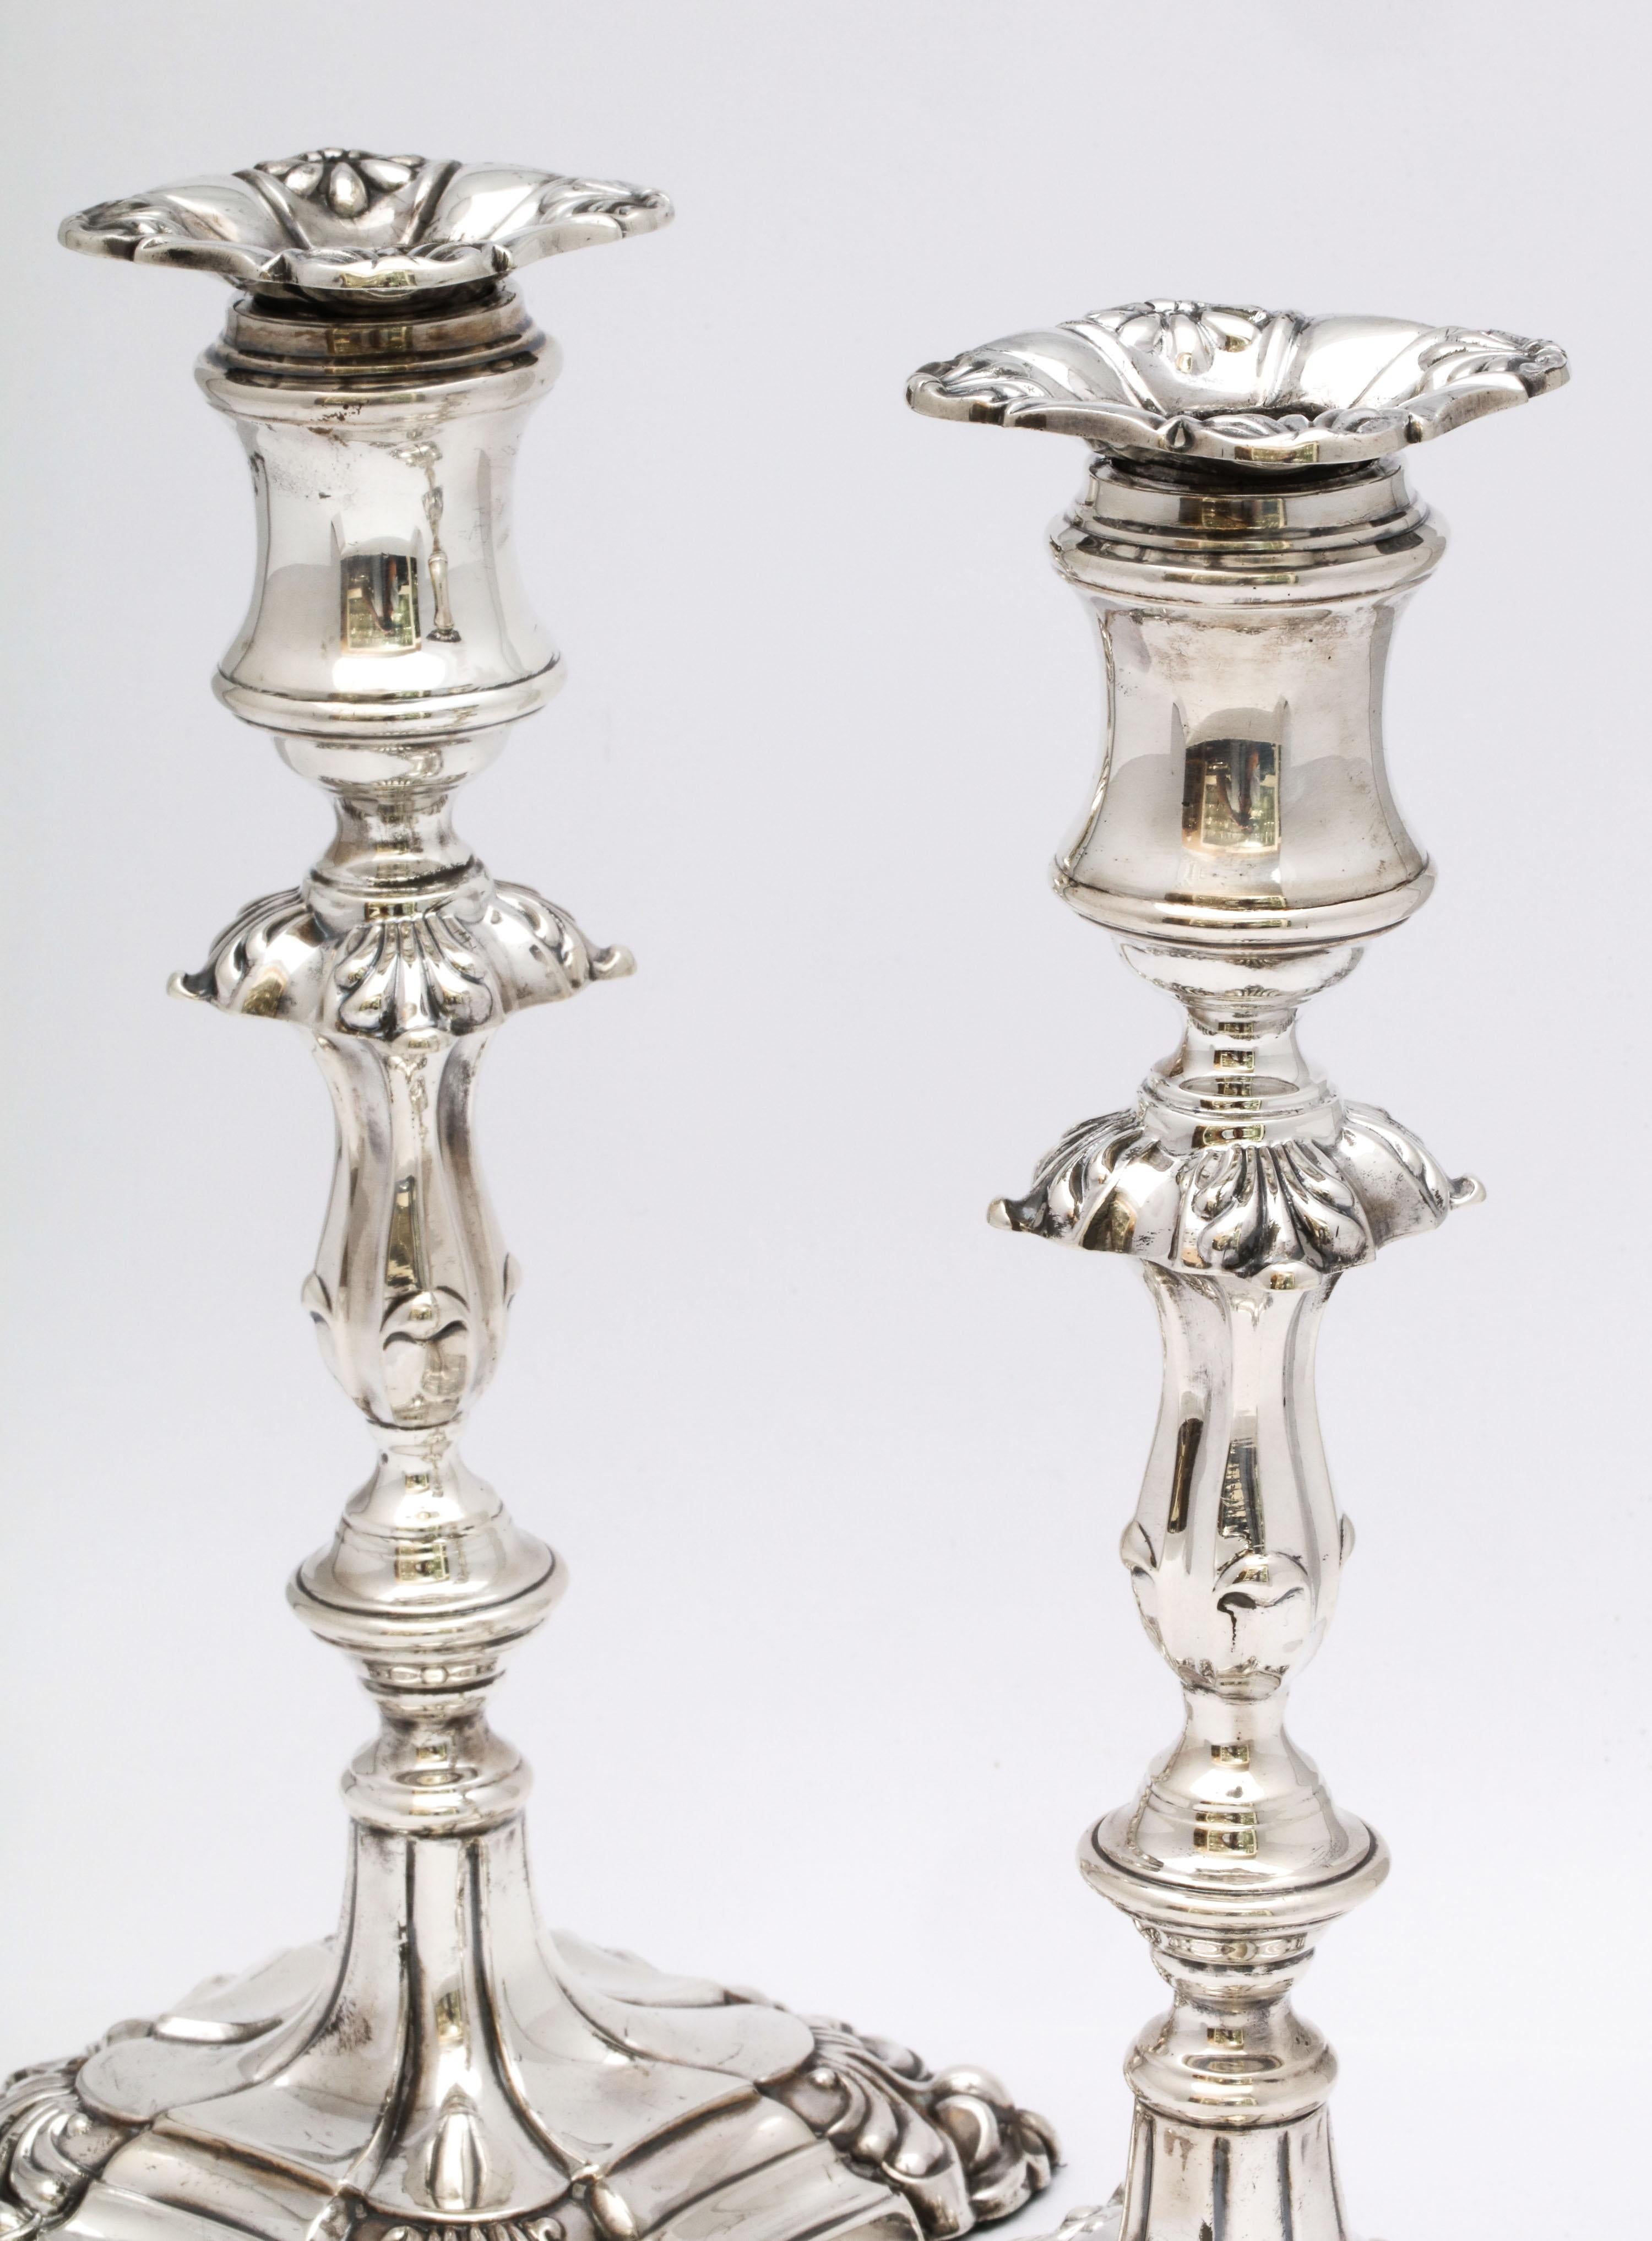 English Pair of Sterling Silver Georgian-Style Candlesticks by Walker and Hall